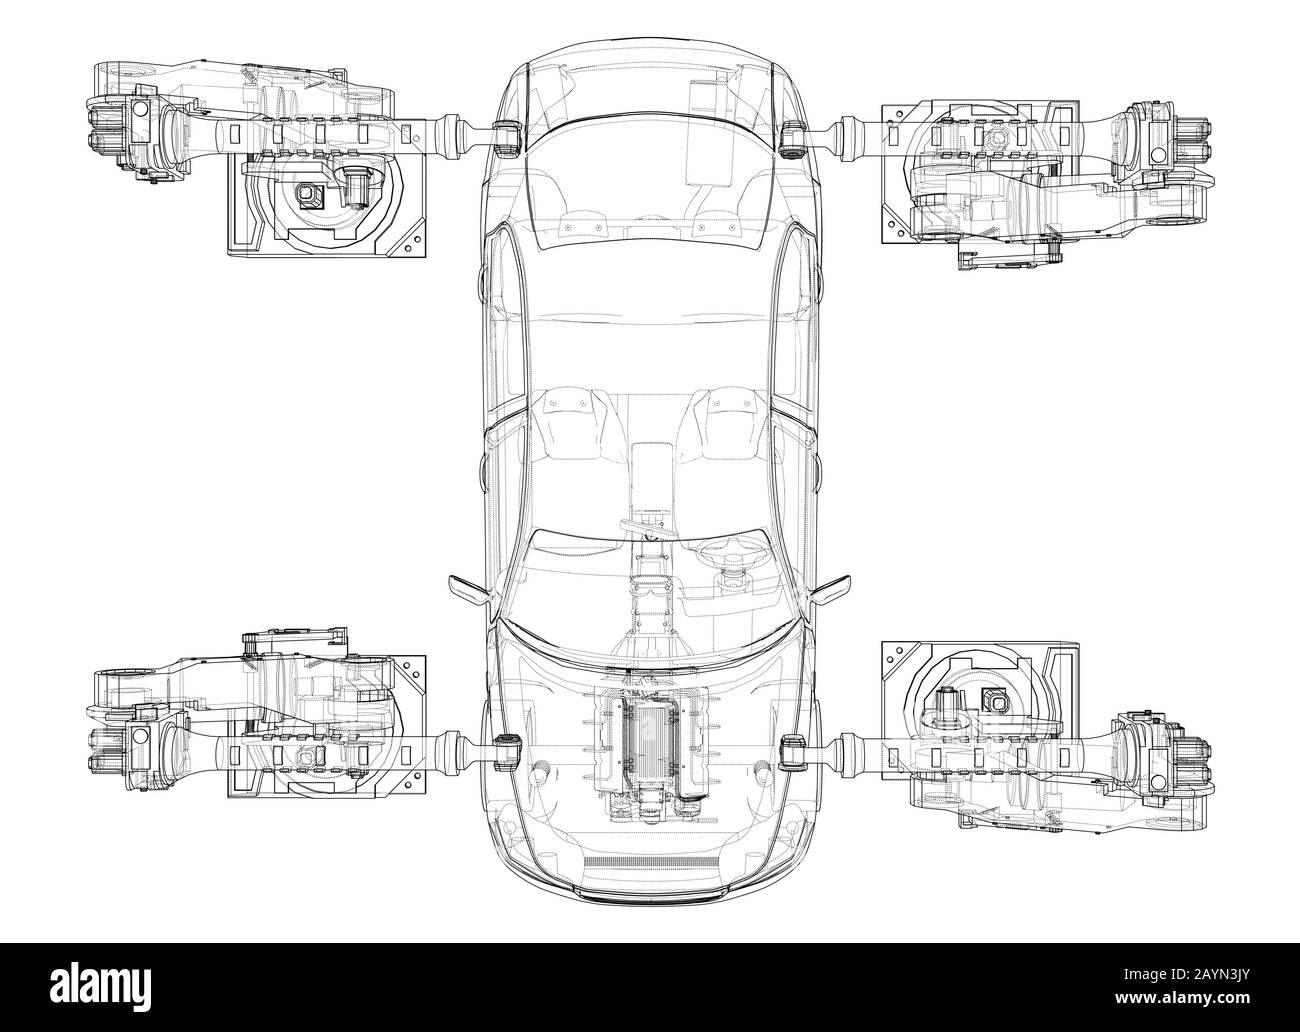 Assembly of motor vehicle. Robotic equipment makes Assembly of car. Blueprint style. Vector rendering from 3D model Stock Vector